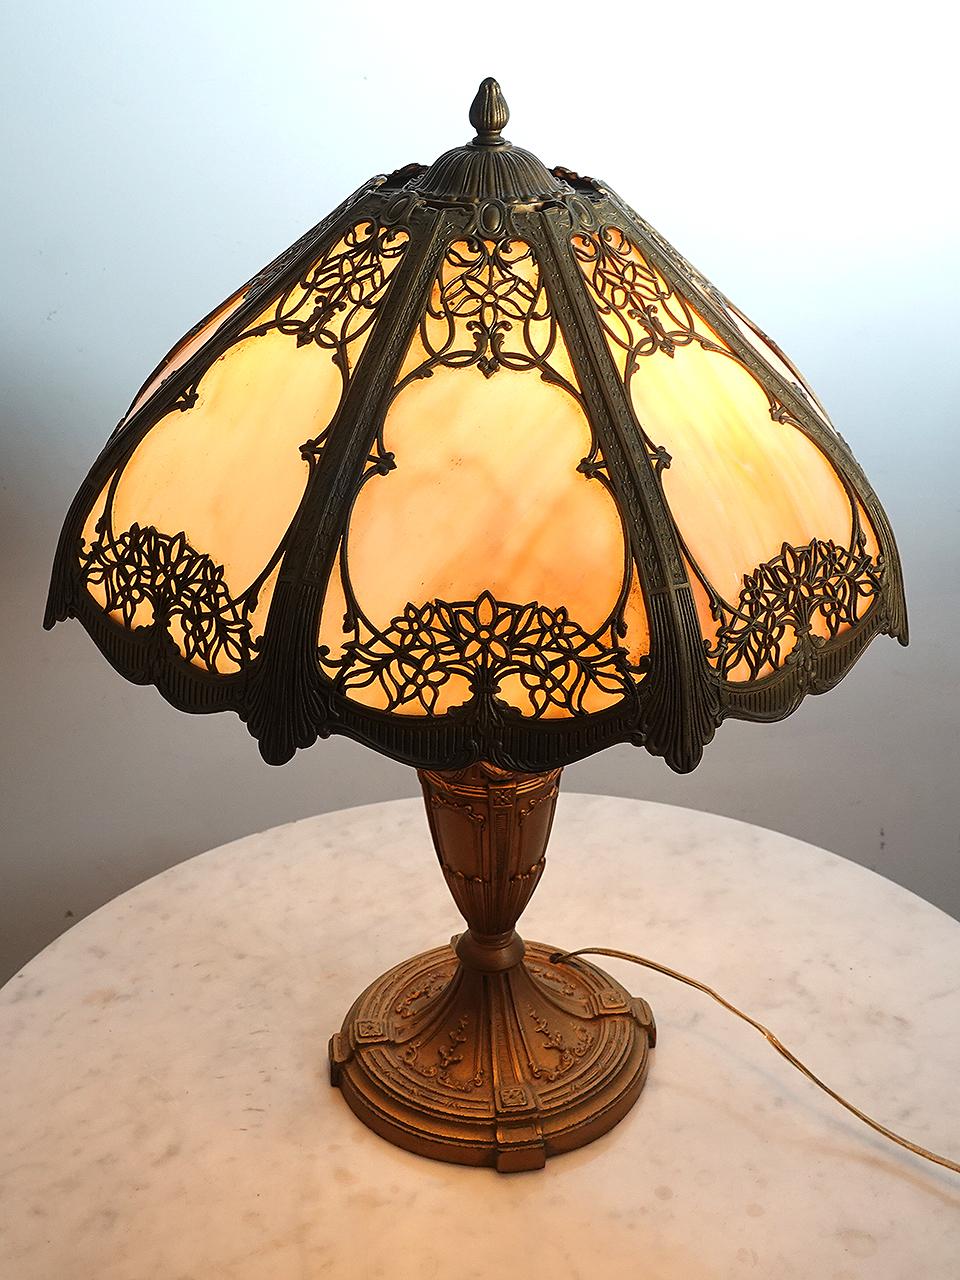 This is a nicely designed Arts and Crafts table lamp. Its impressive at 2 foot tall with a 19 inch diameter. It has a curved shade with 8 cast floral filigree panels. Each slump glass (curved) panel features a cream -  amber variegated glass and is